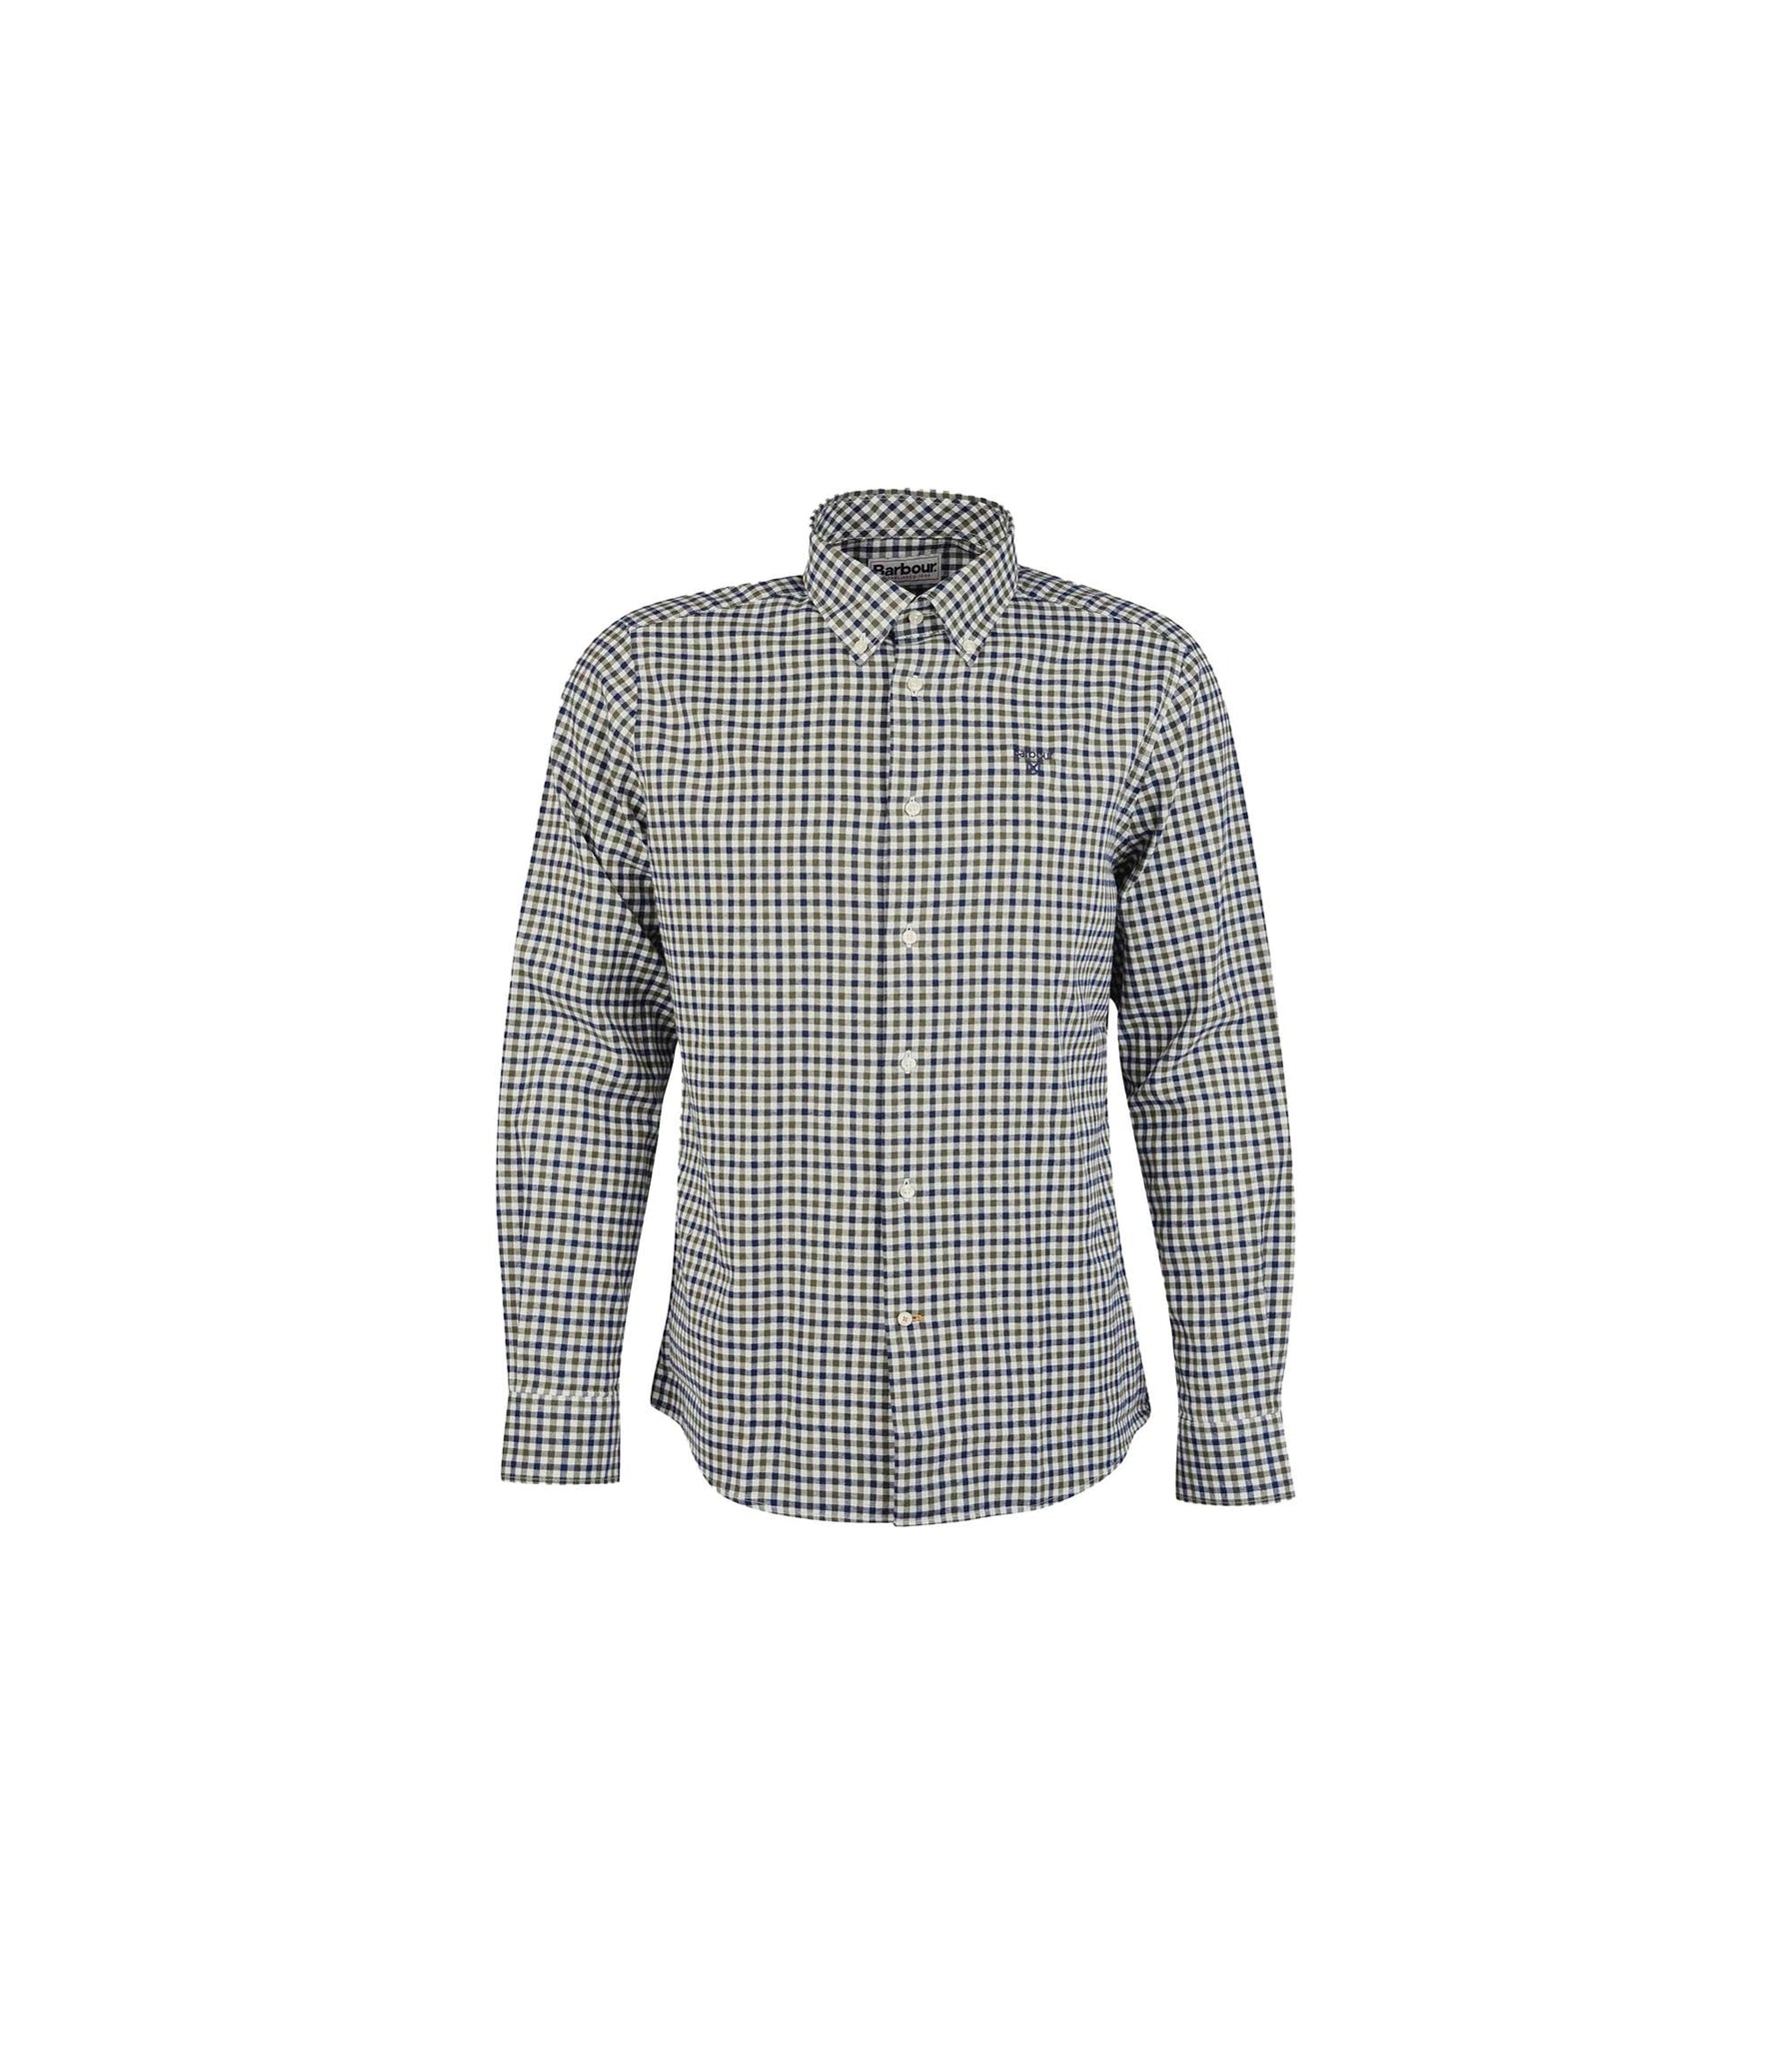 Barbour Finkle Check Shirt Tailored Olive Green Men